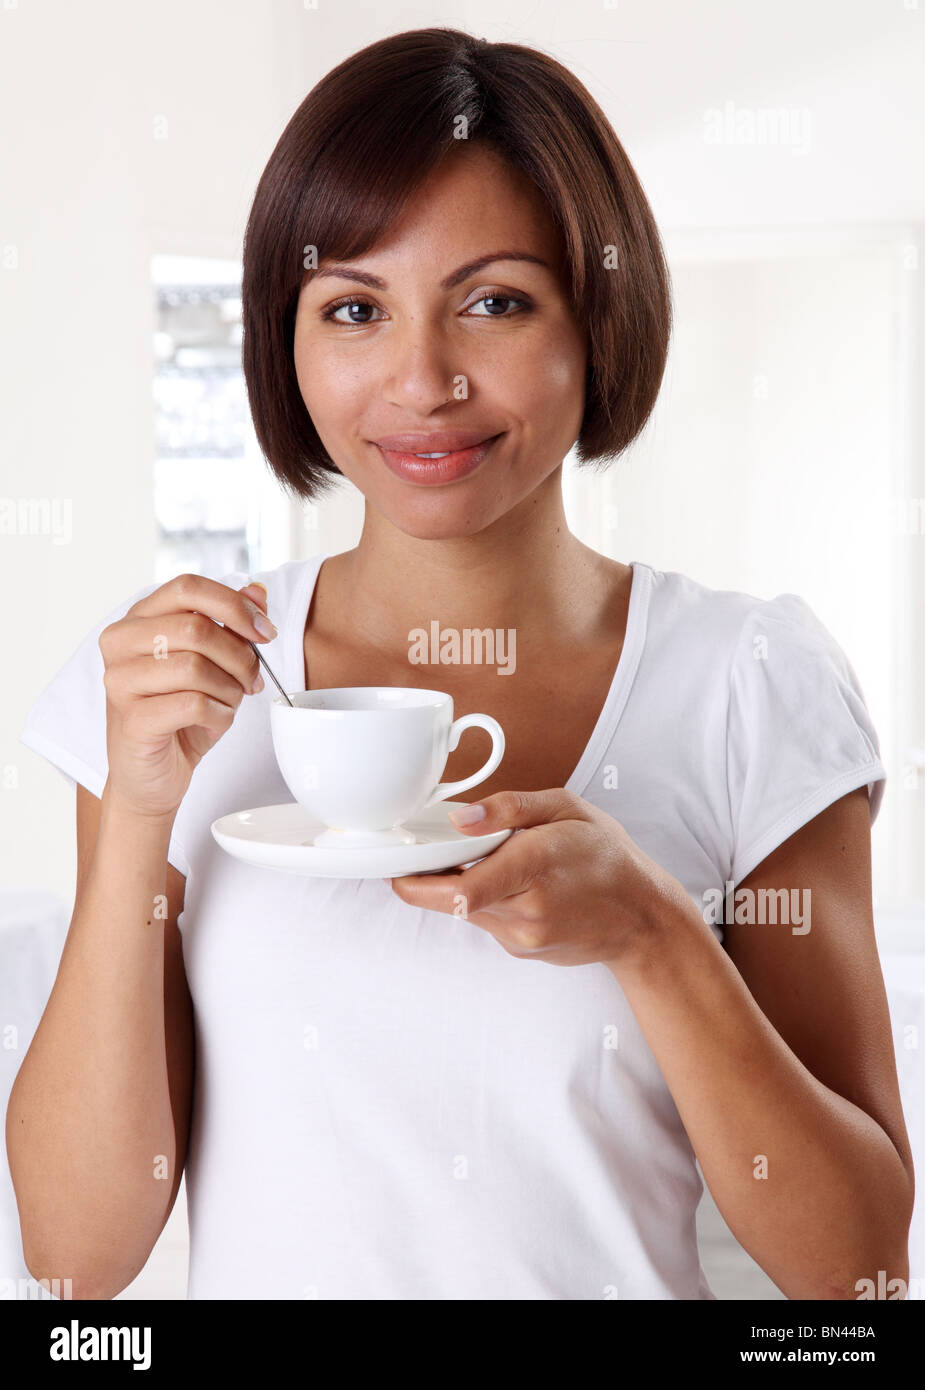 WOMAN HOLDING TEA CUP Stock Photo